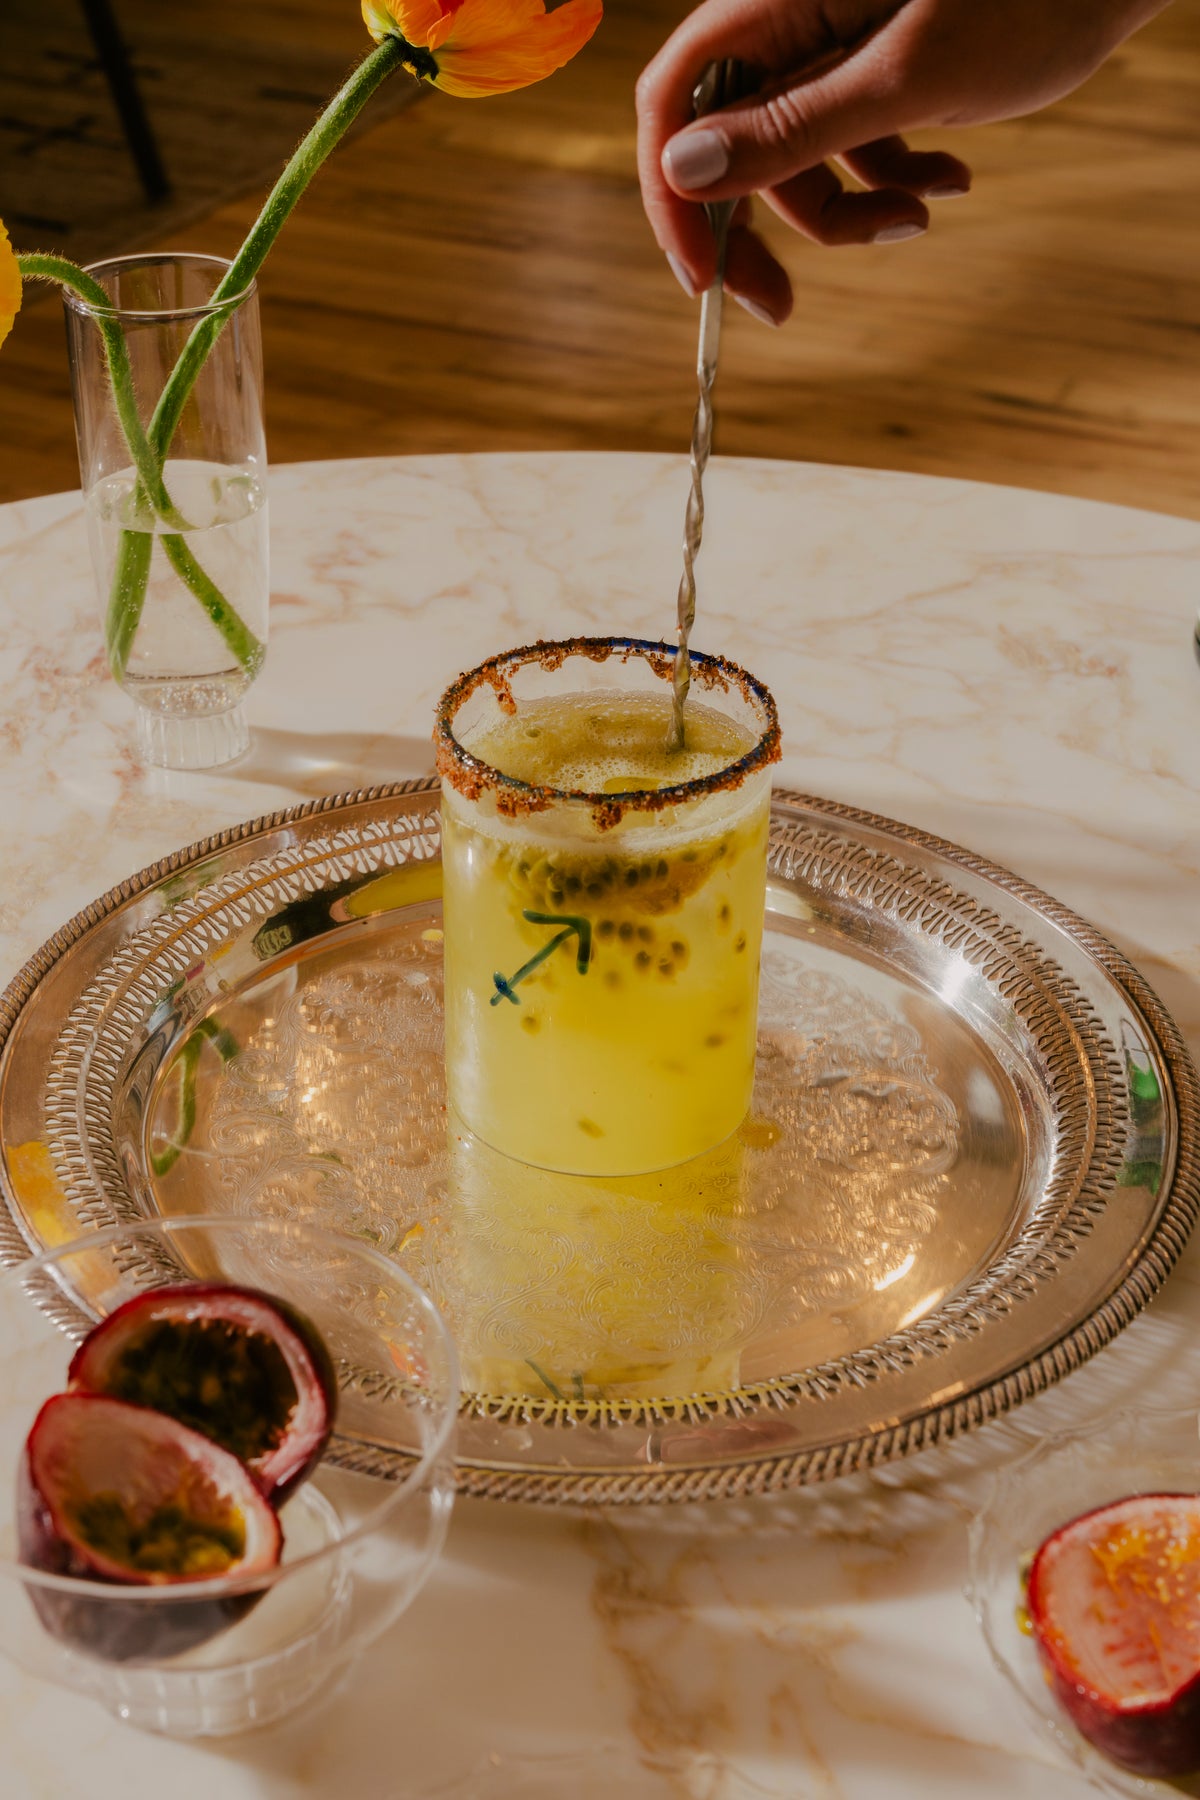 The image showcases a hand stirring a vibrant yellow cocktail adorned with a blue Sagittarius zodiac sign, presented in a clear glass with a spiced rim. The drink is speckled with passion fruit seeds, suggesting a tropical flavor profile. The glass sits atop an intricate silver tray, which reflects the light and adds to the luxurious feel of the scene. 